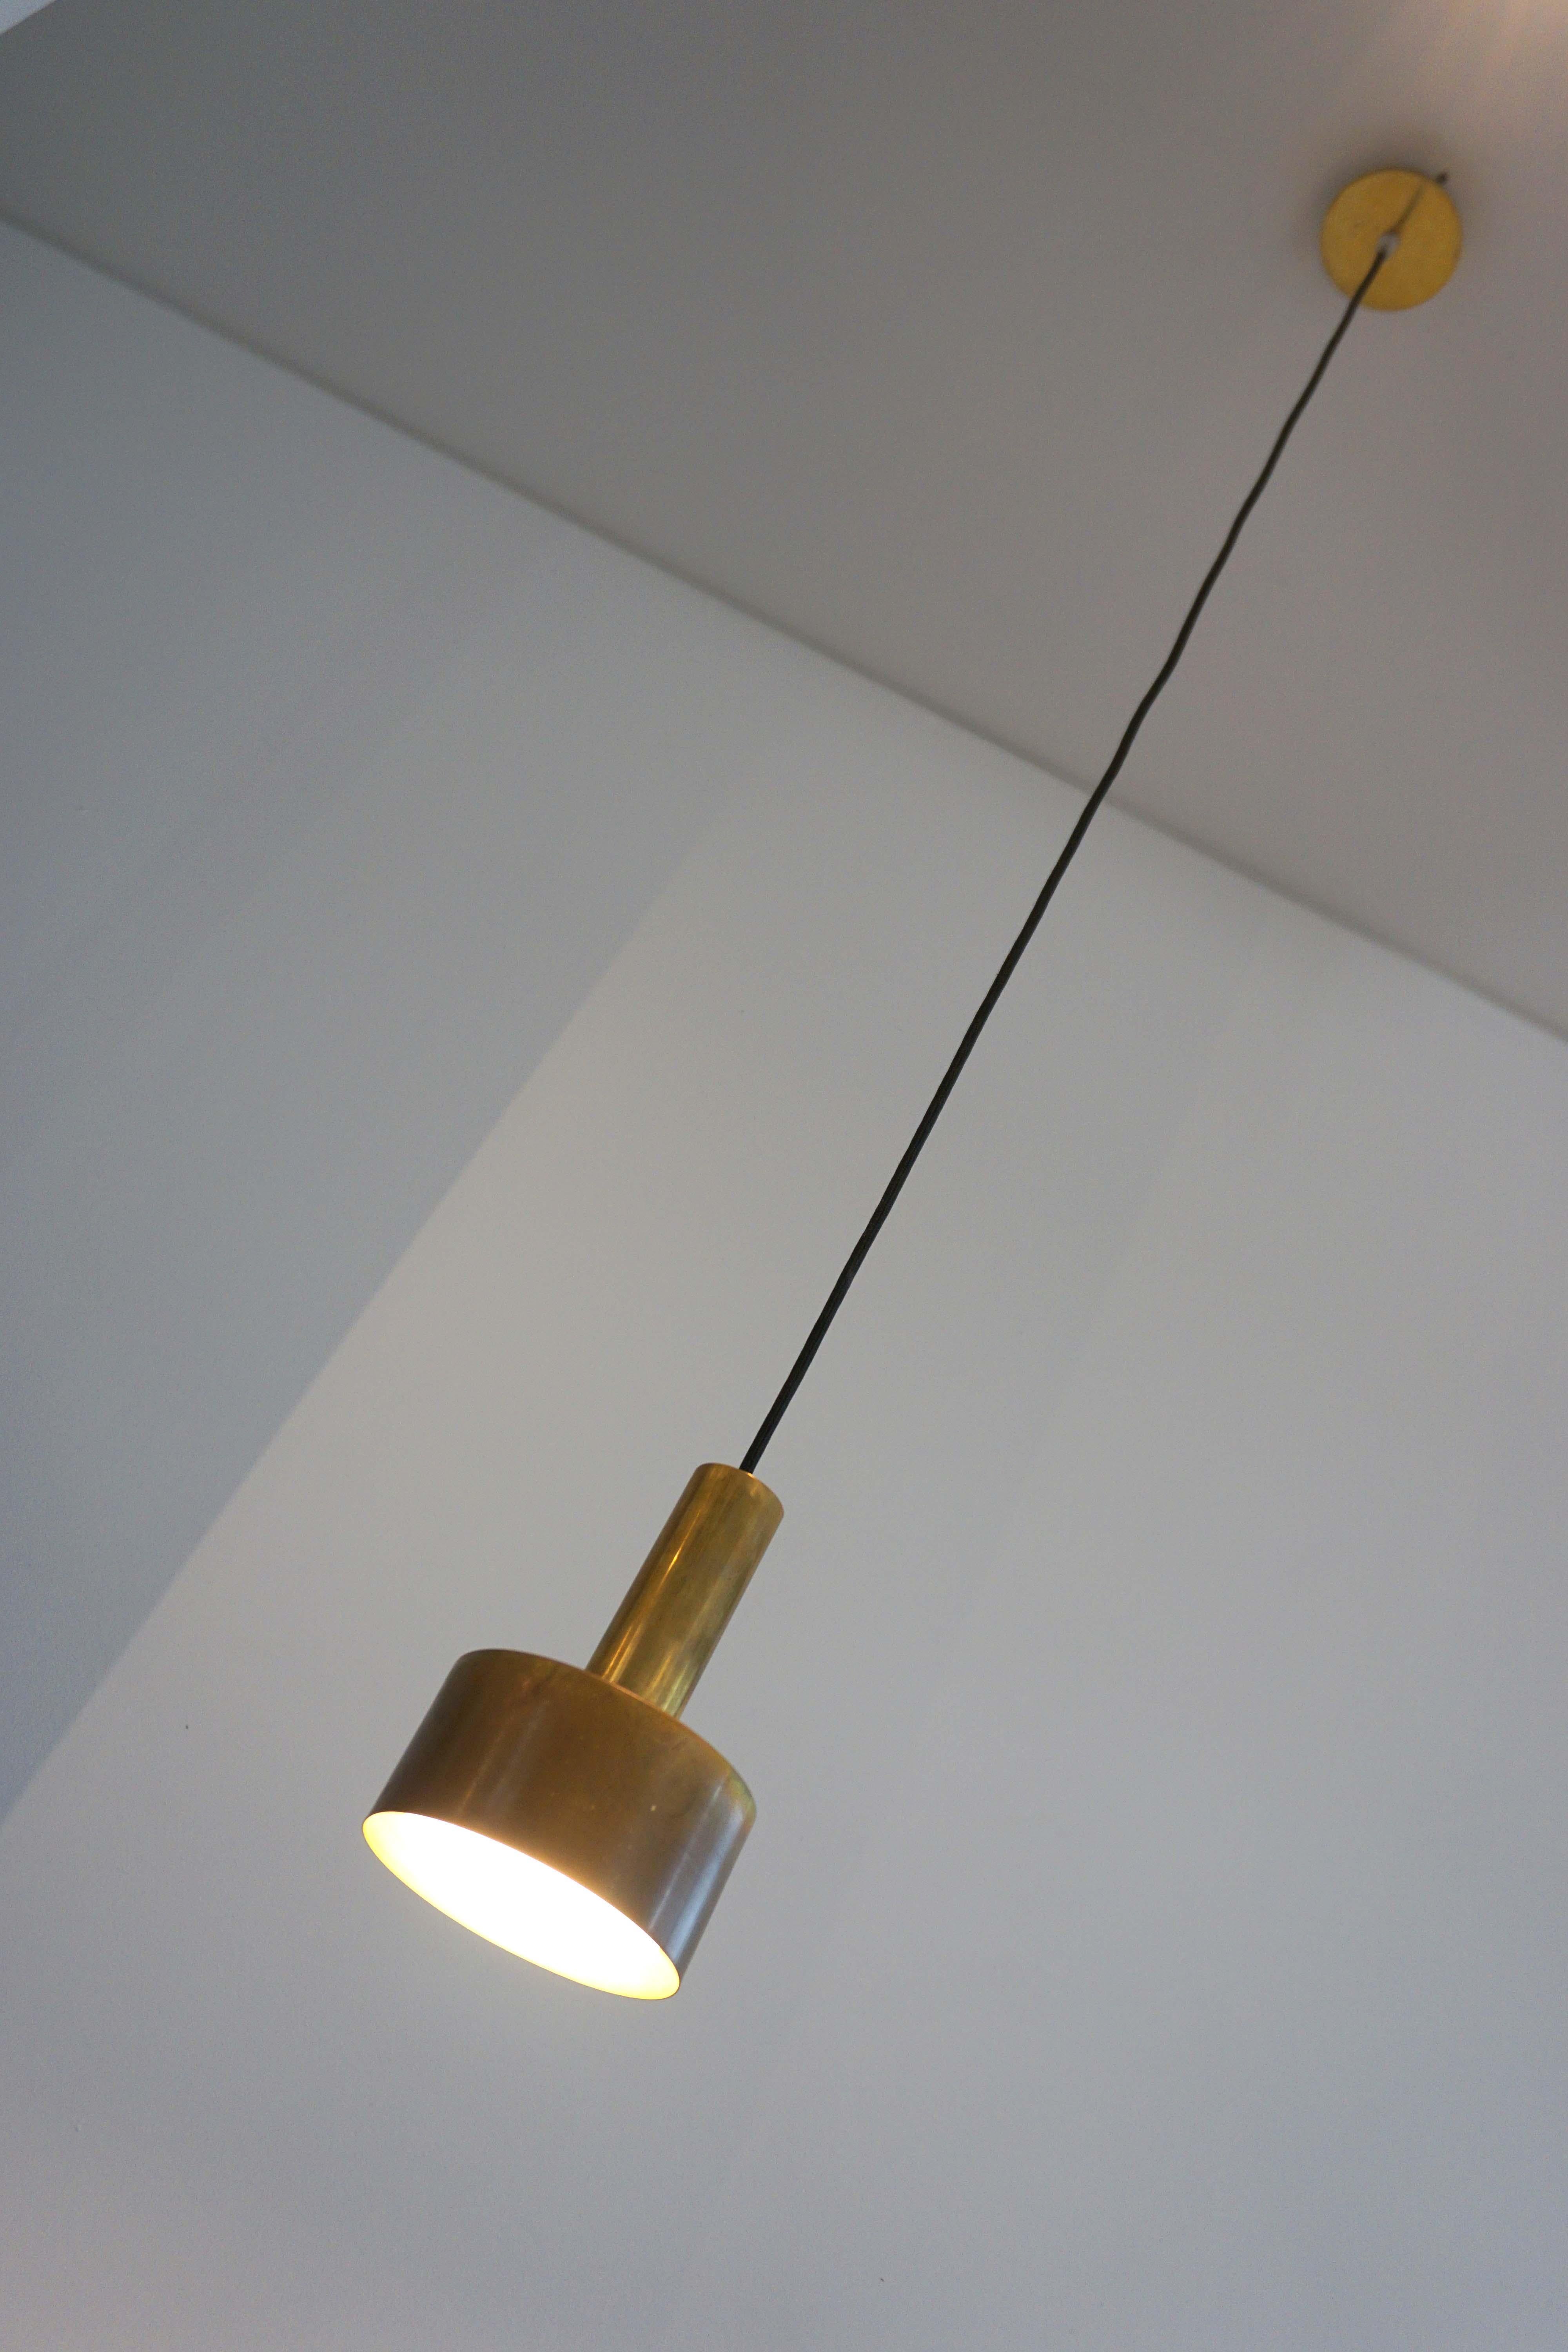 Contemporary-Modern Pendelleuchte aus Naturmessing Handcrafted in Italy by 247lab (Moderne) im Angebot